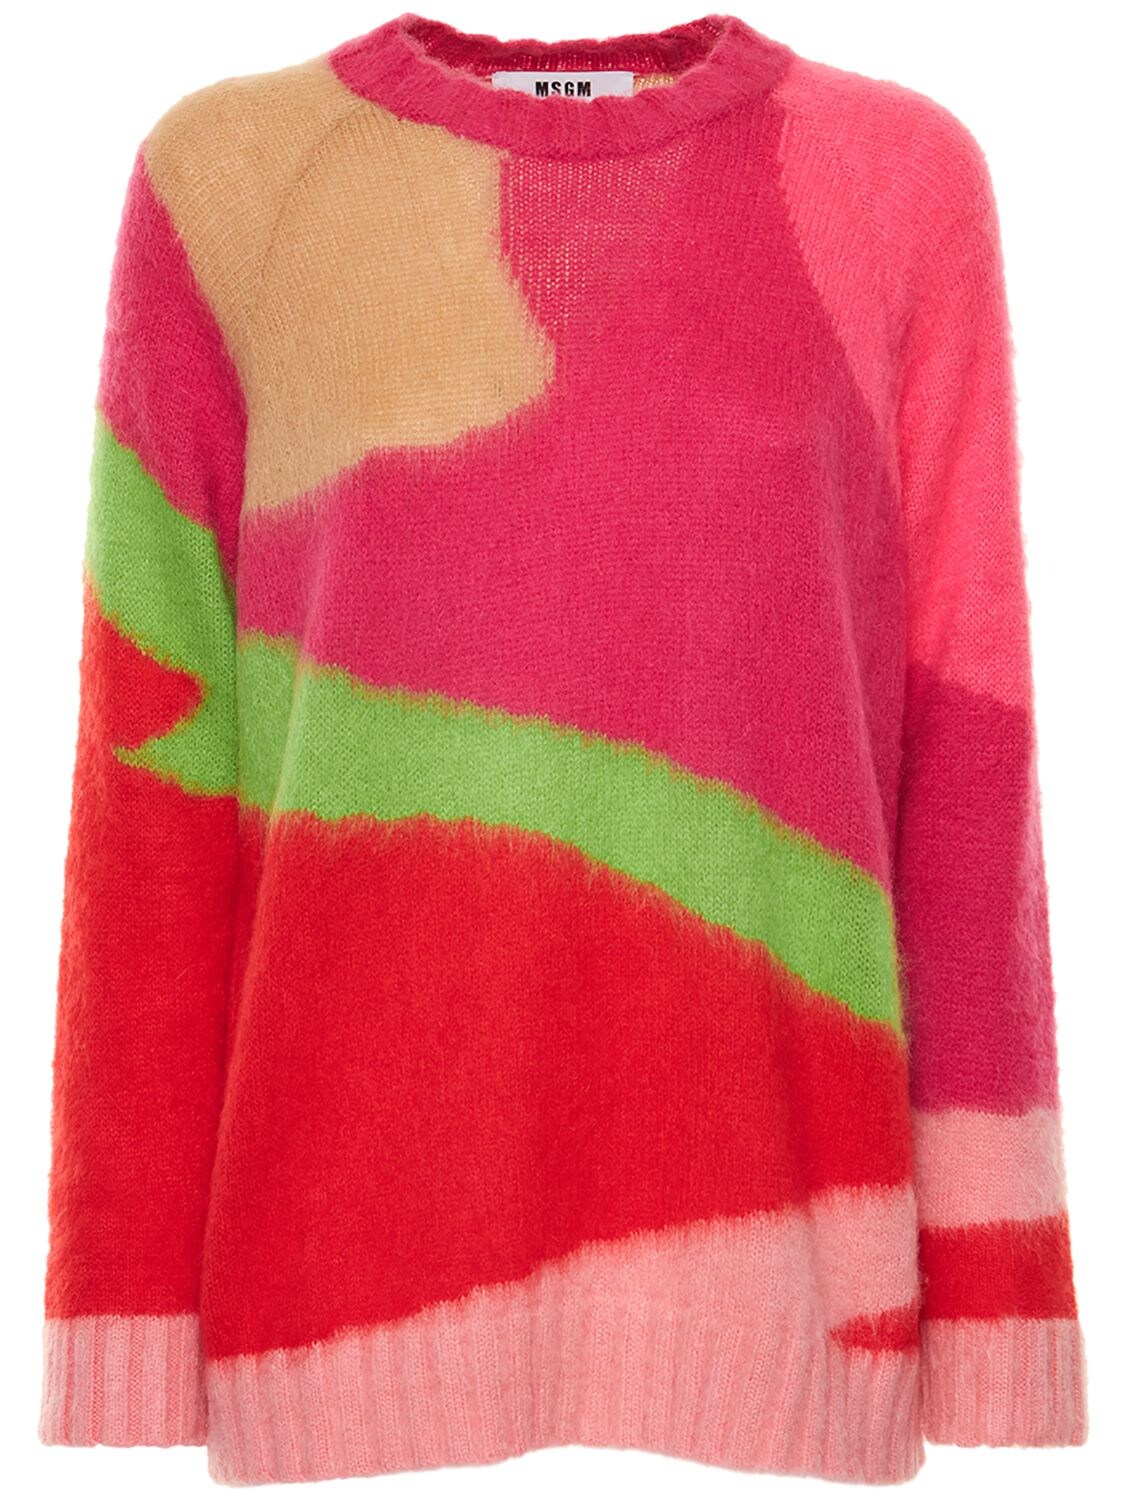 MSGM INTARSIA MOHAIR BLEND KNIT SWEATER